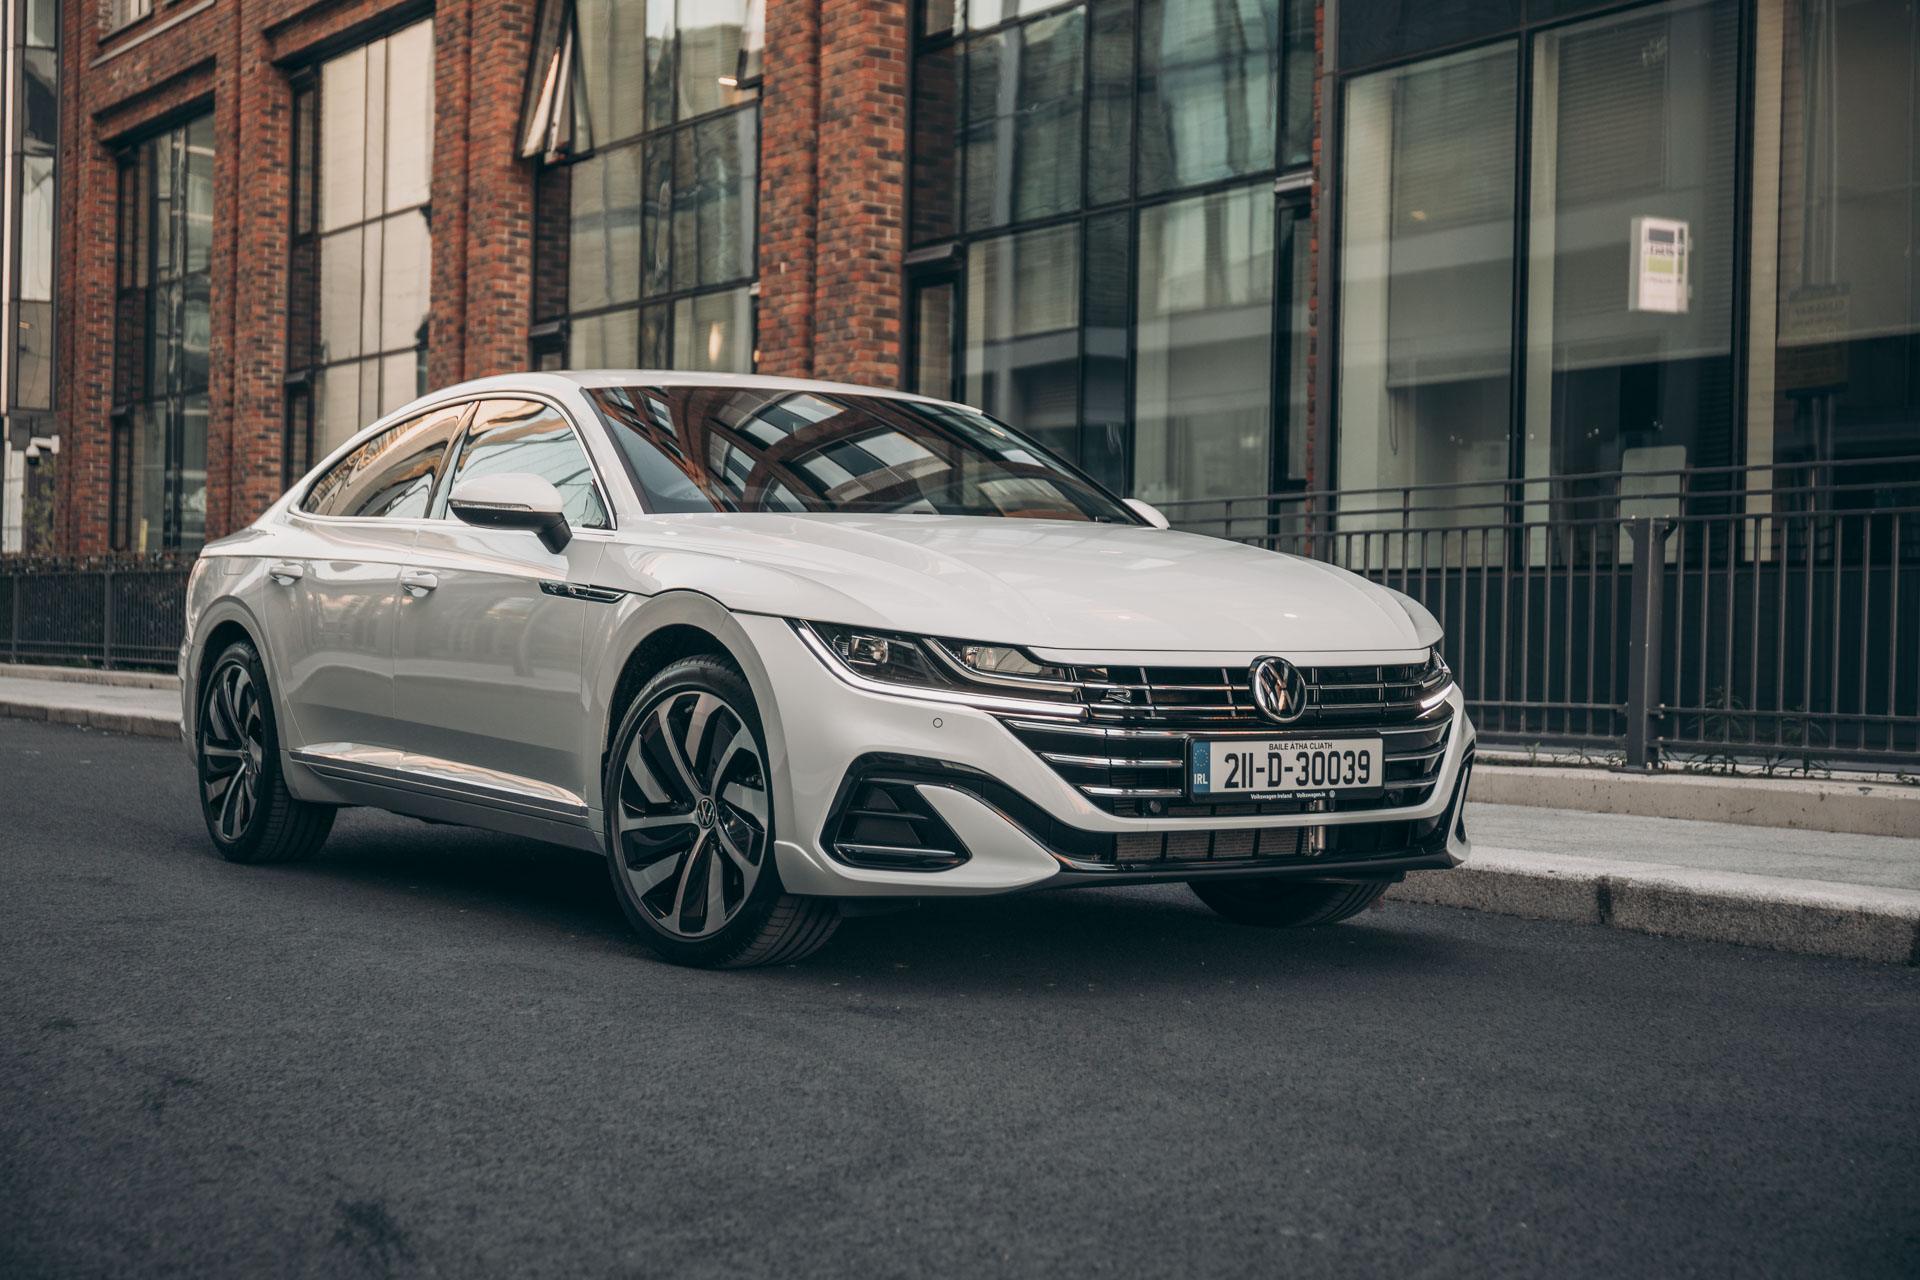 New Car Review: Volkswagen Arteon R-Line eHybrid - The AA